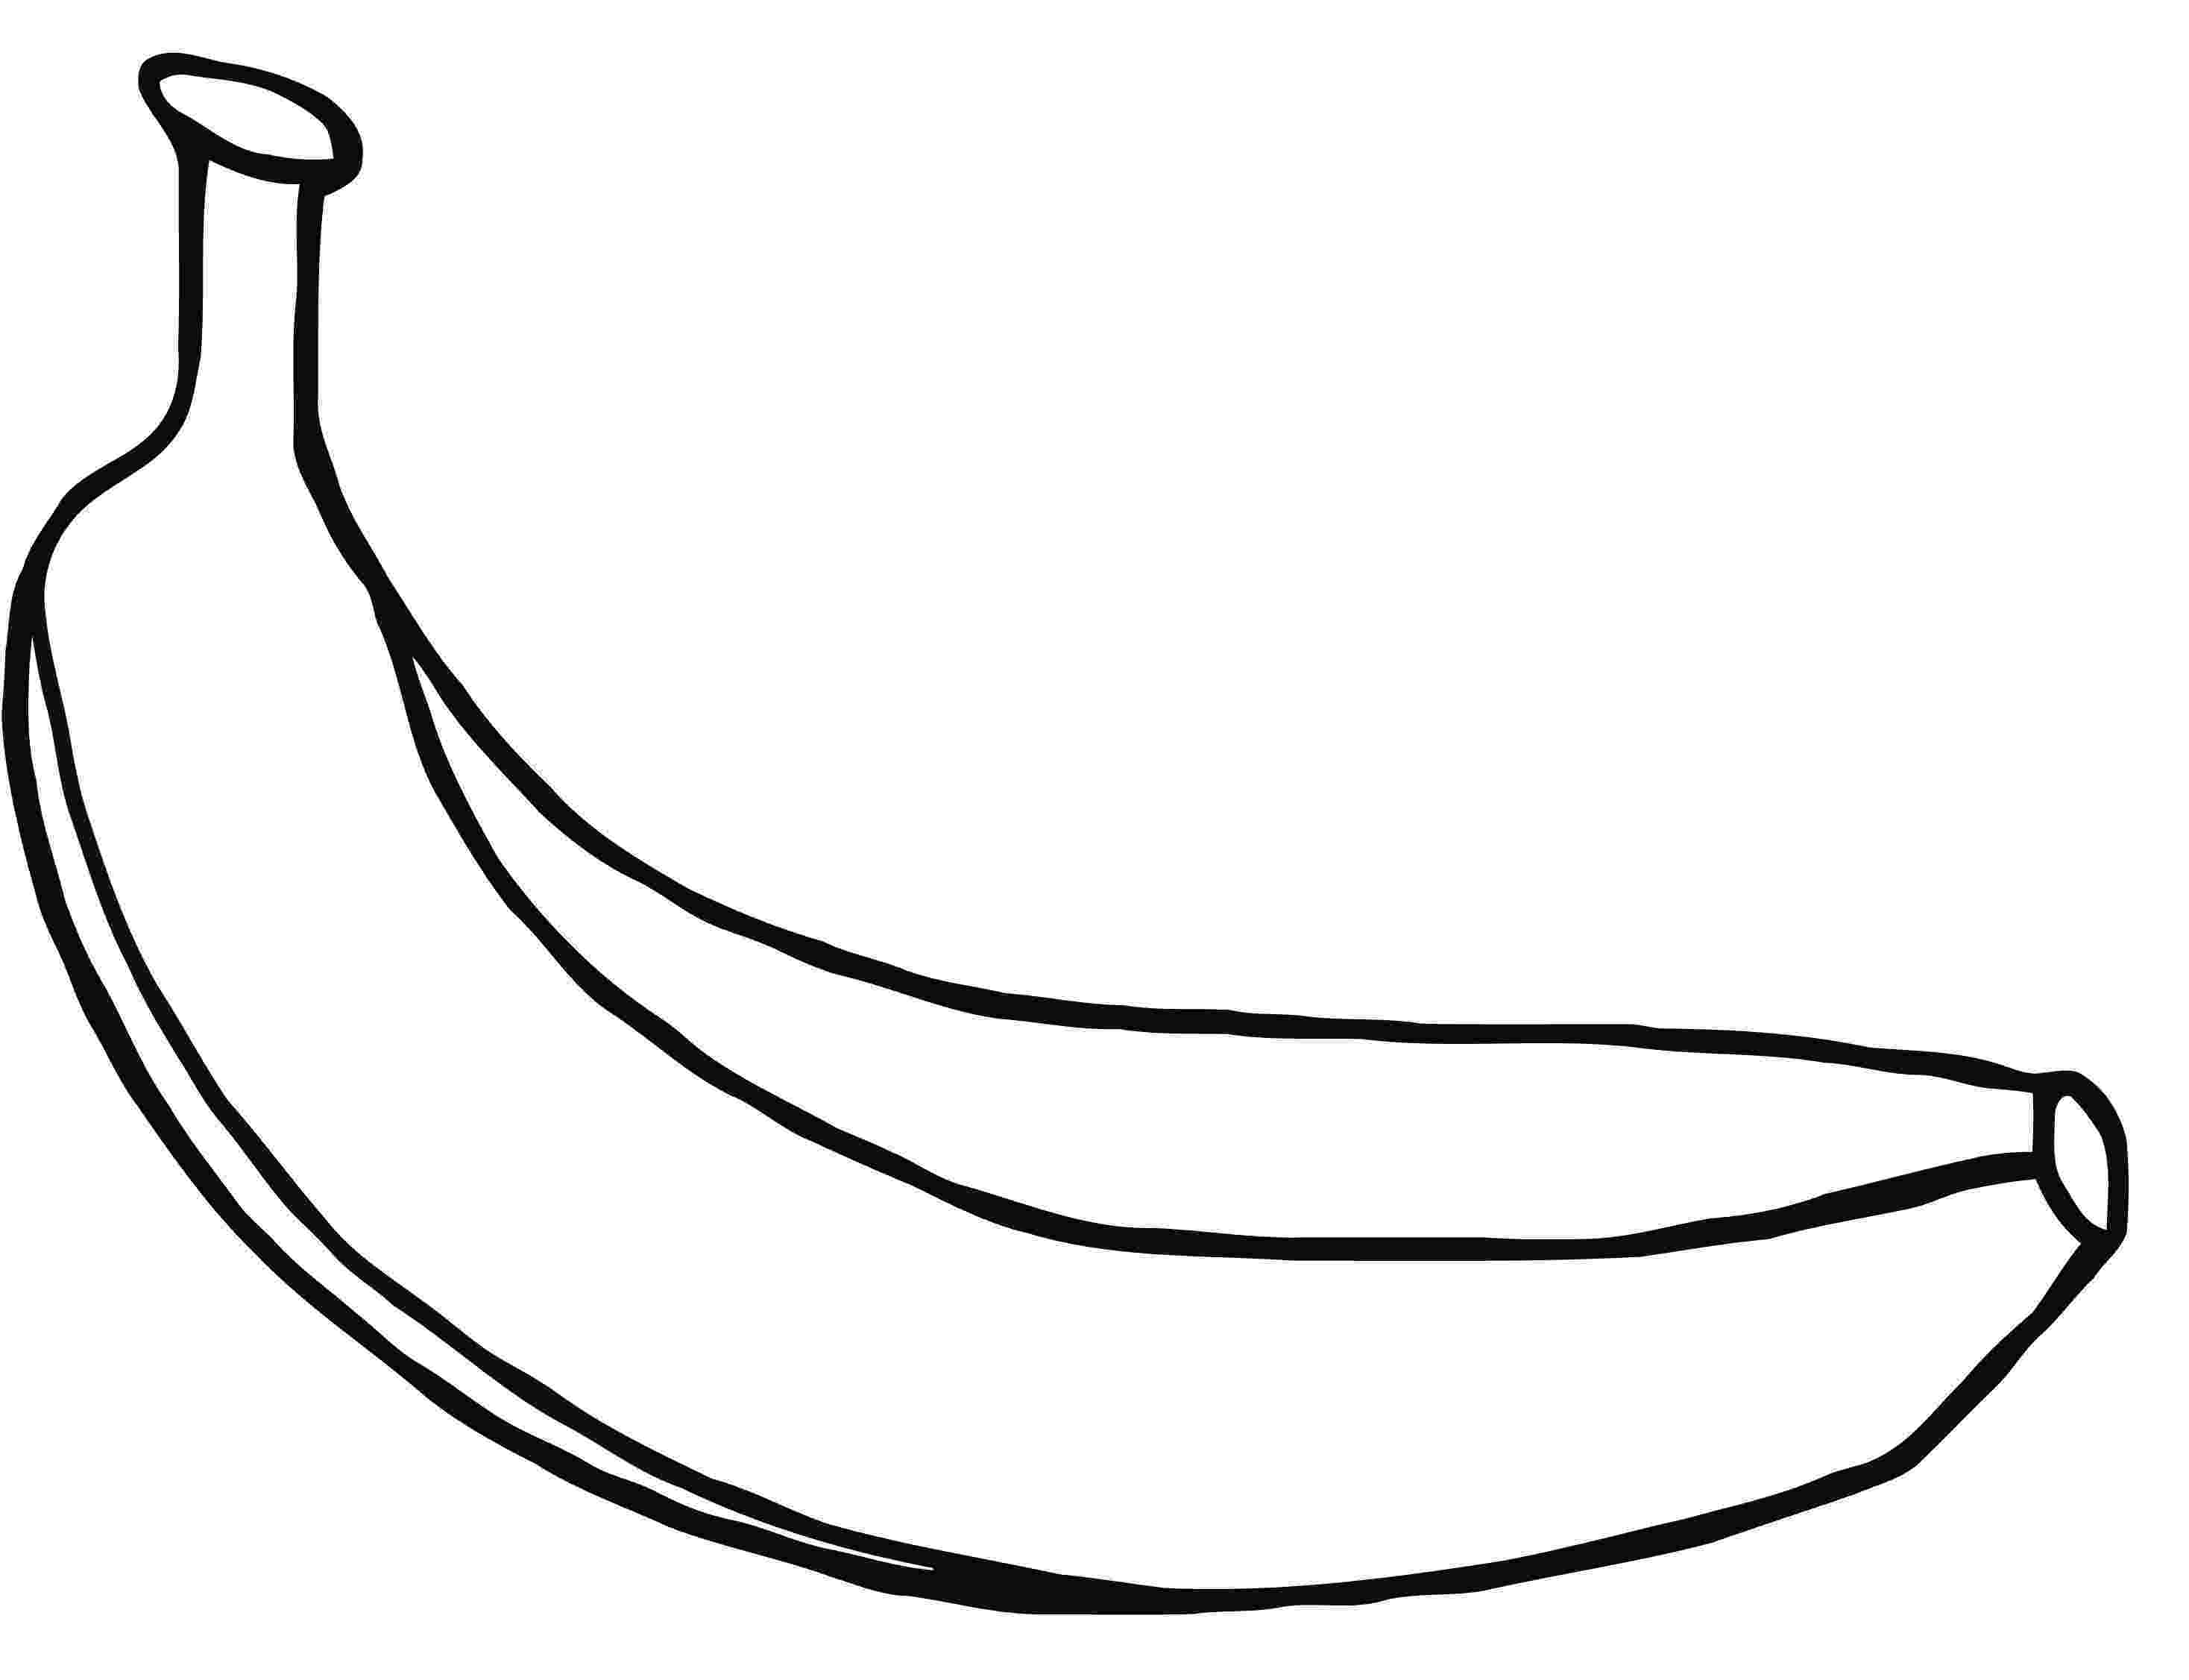 picture of banana for colouring bunch of bananas coloring sheet coloring pages for colouring picture of banana 